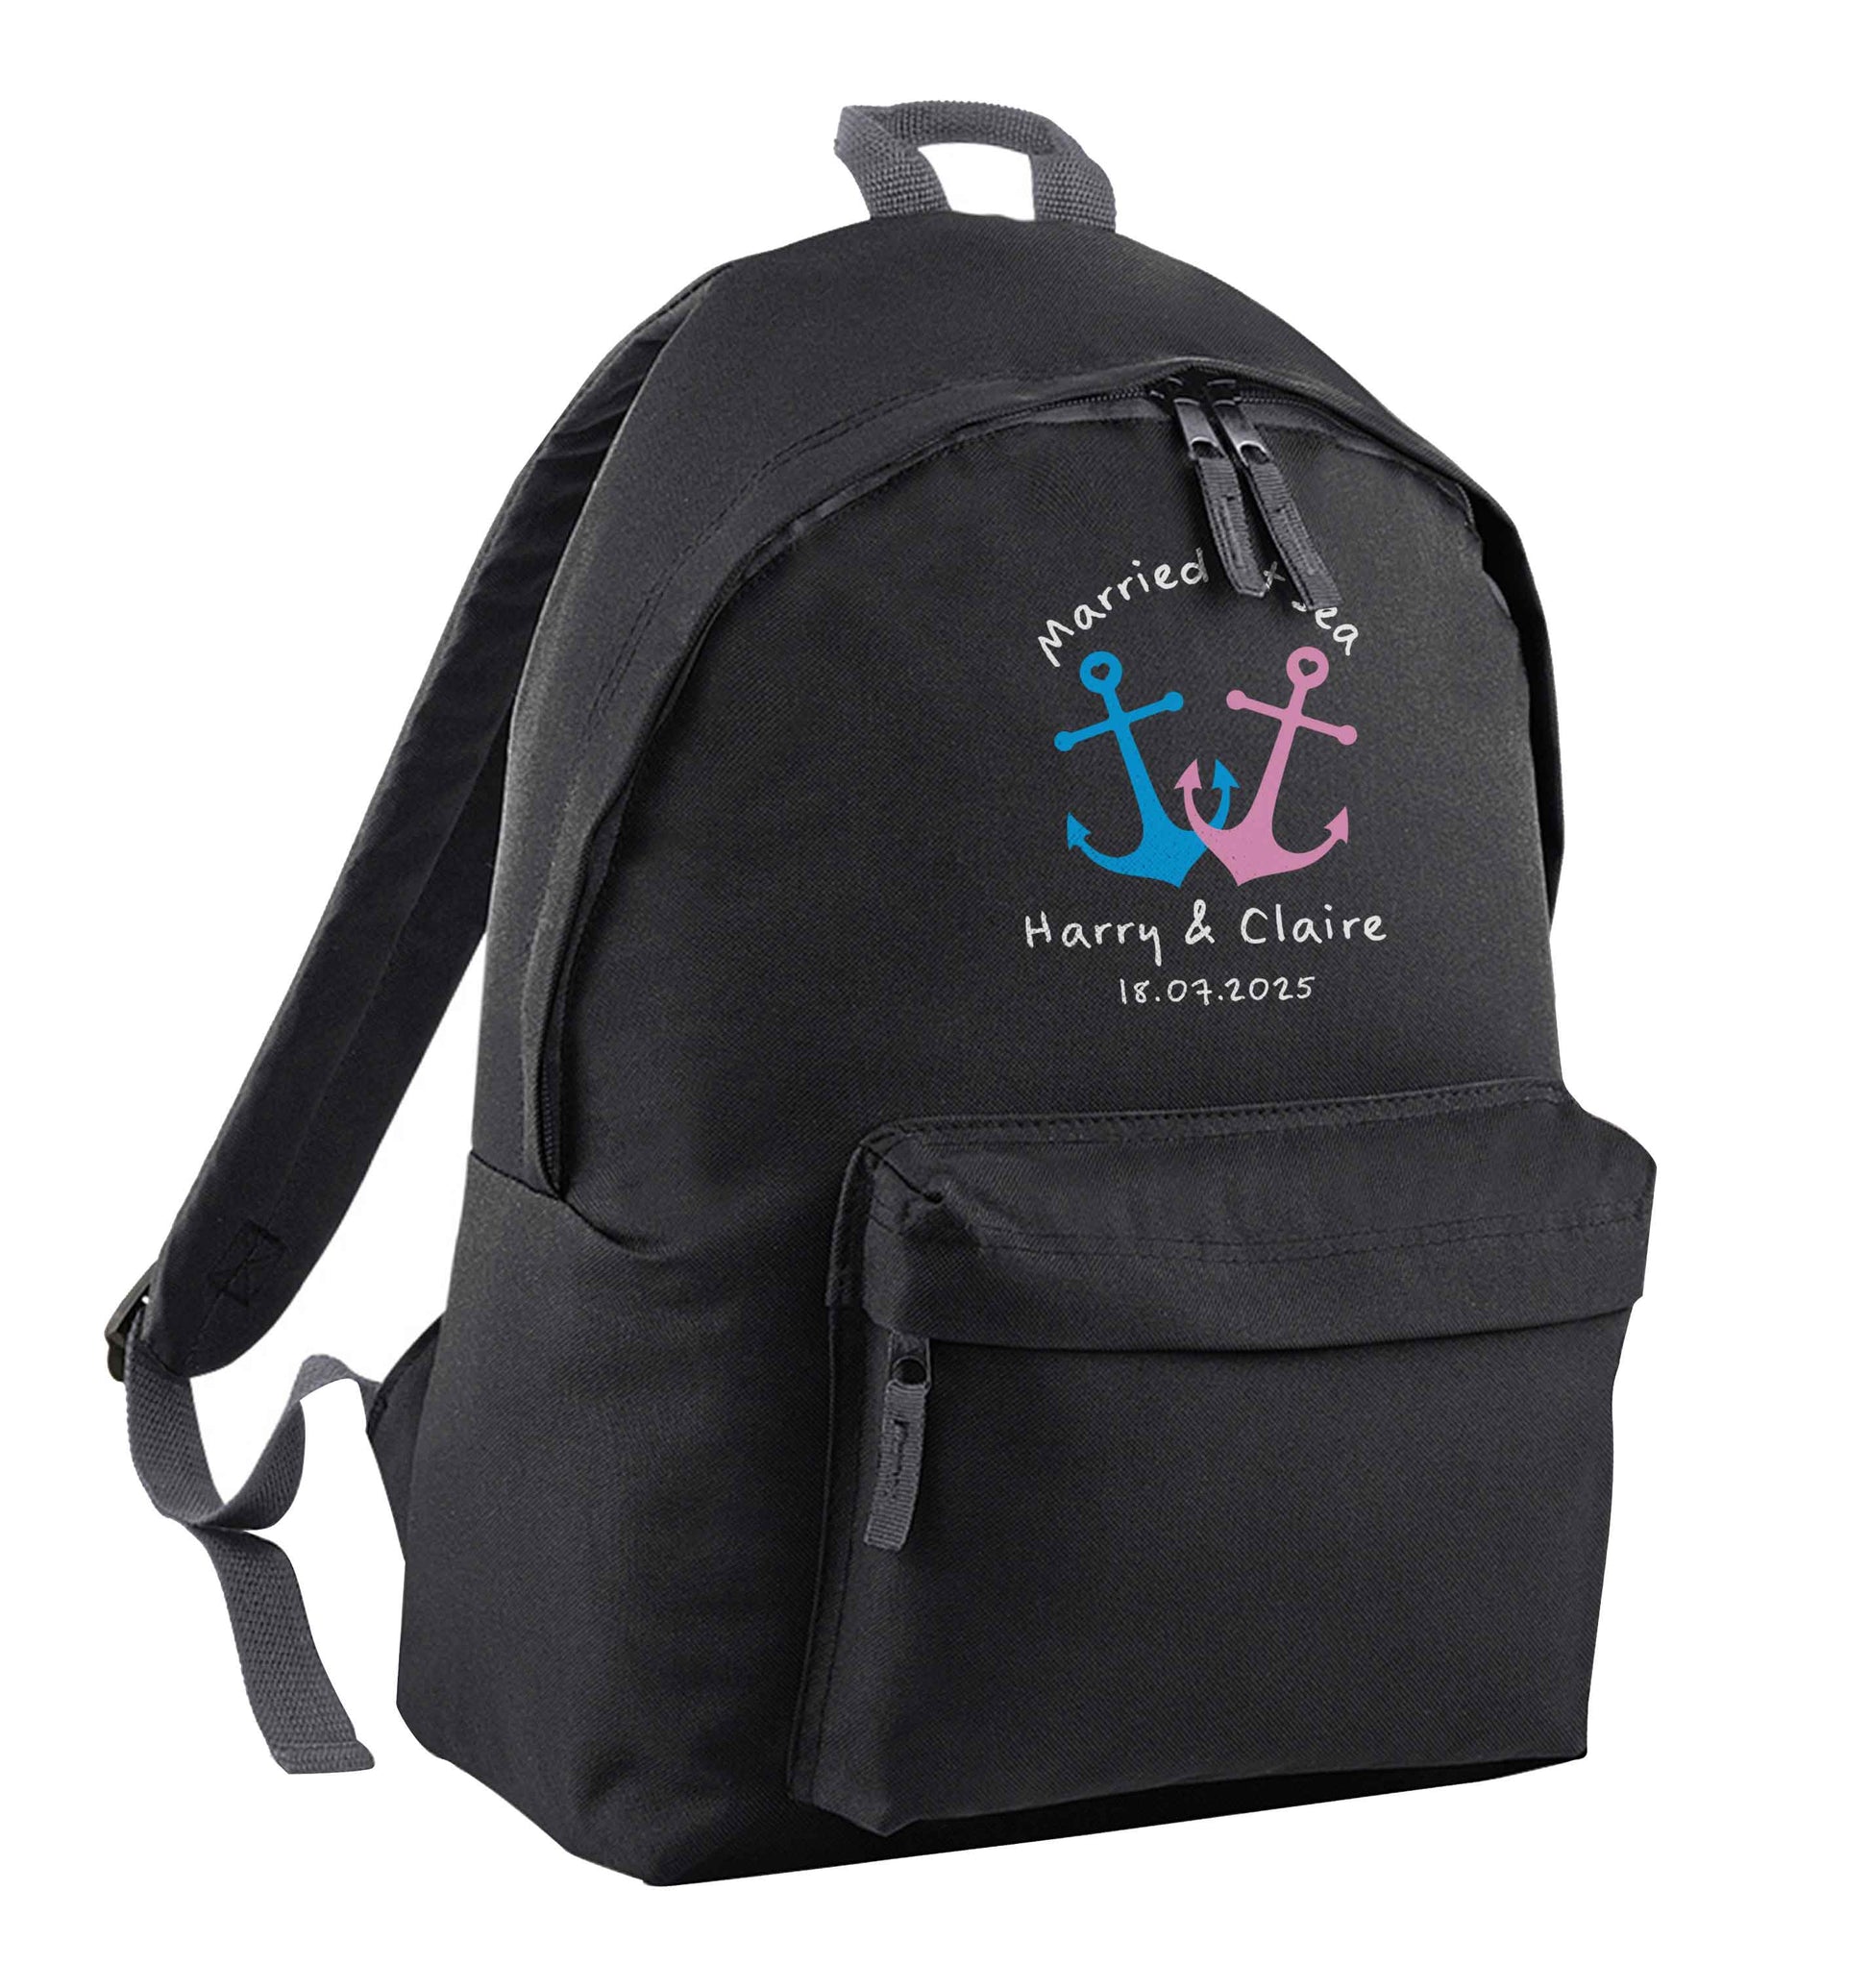 Married at sea black adults backpack